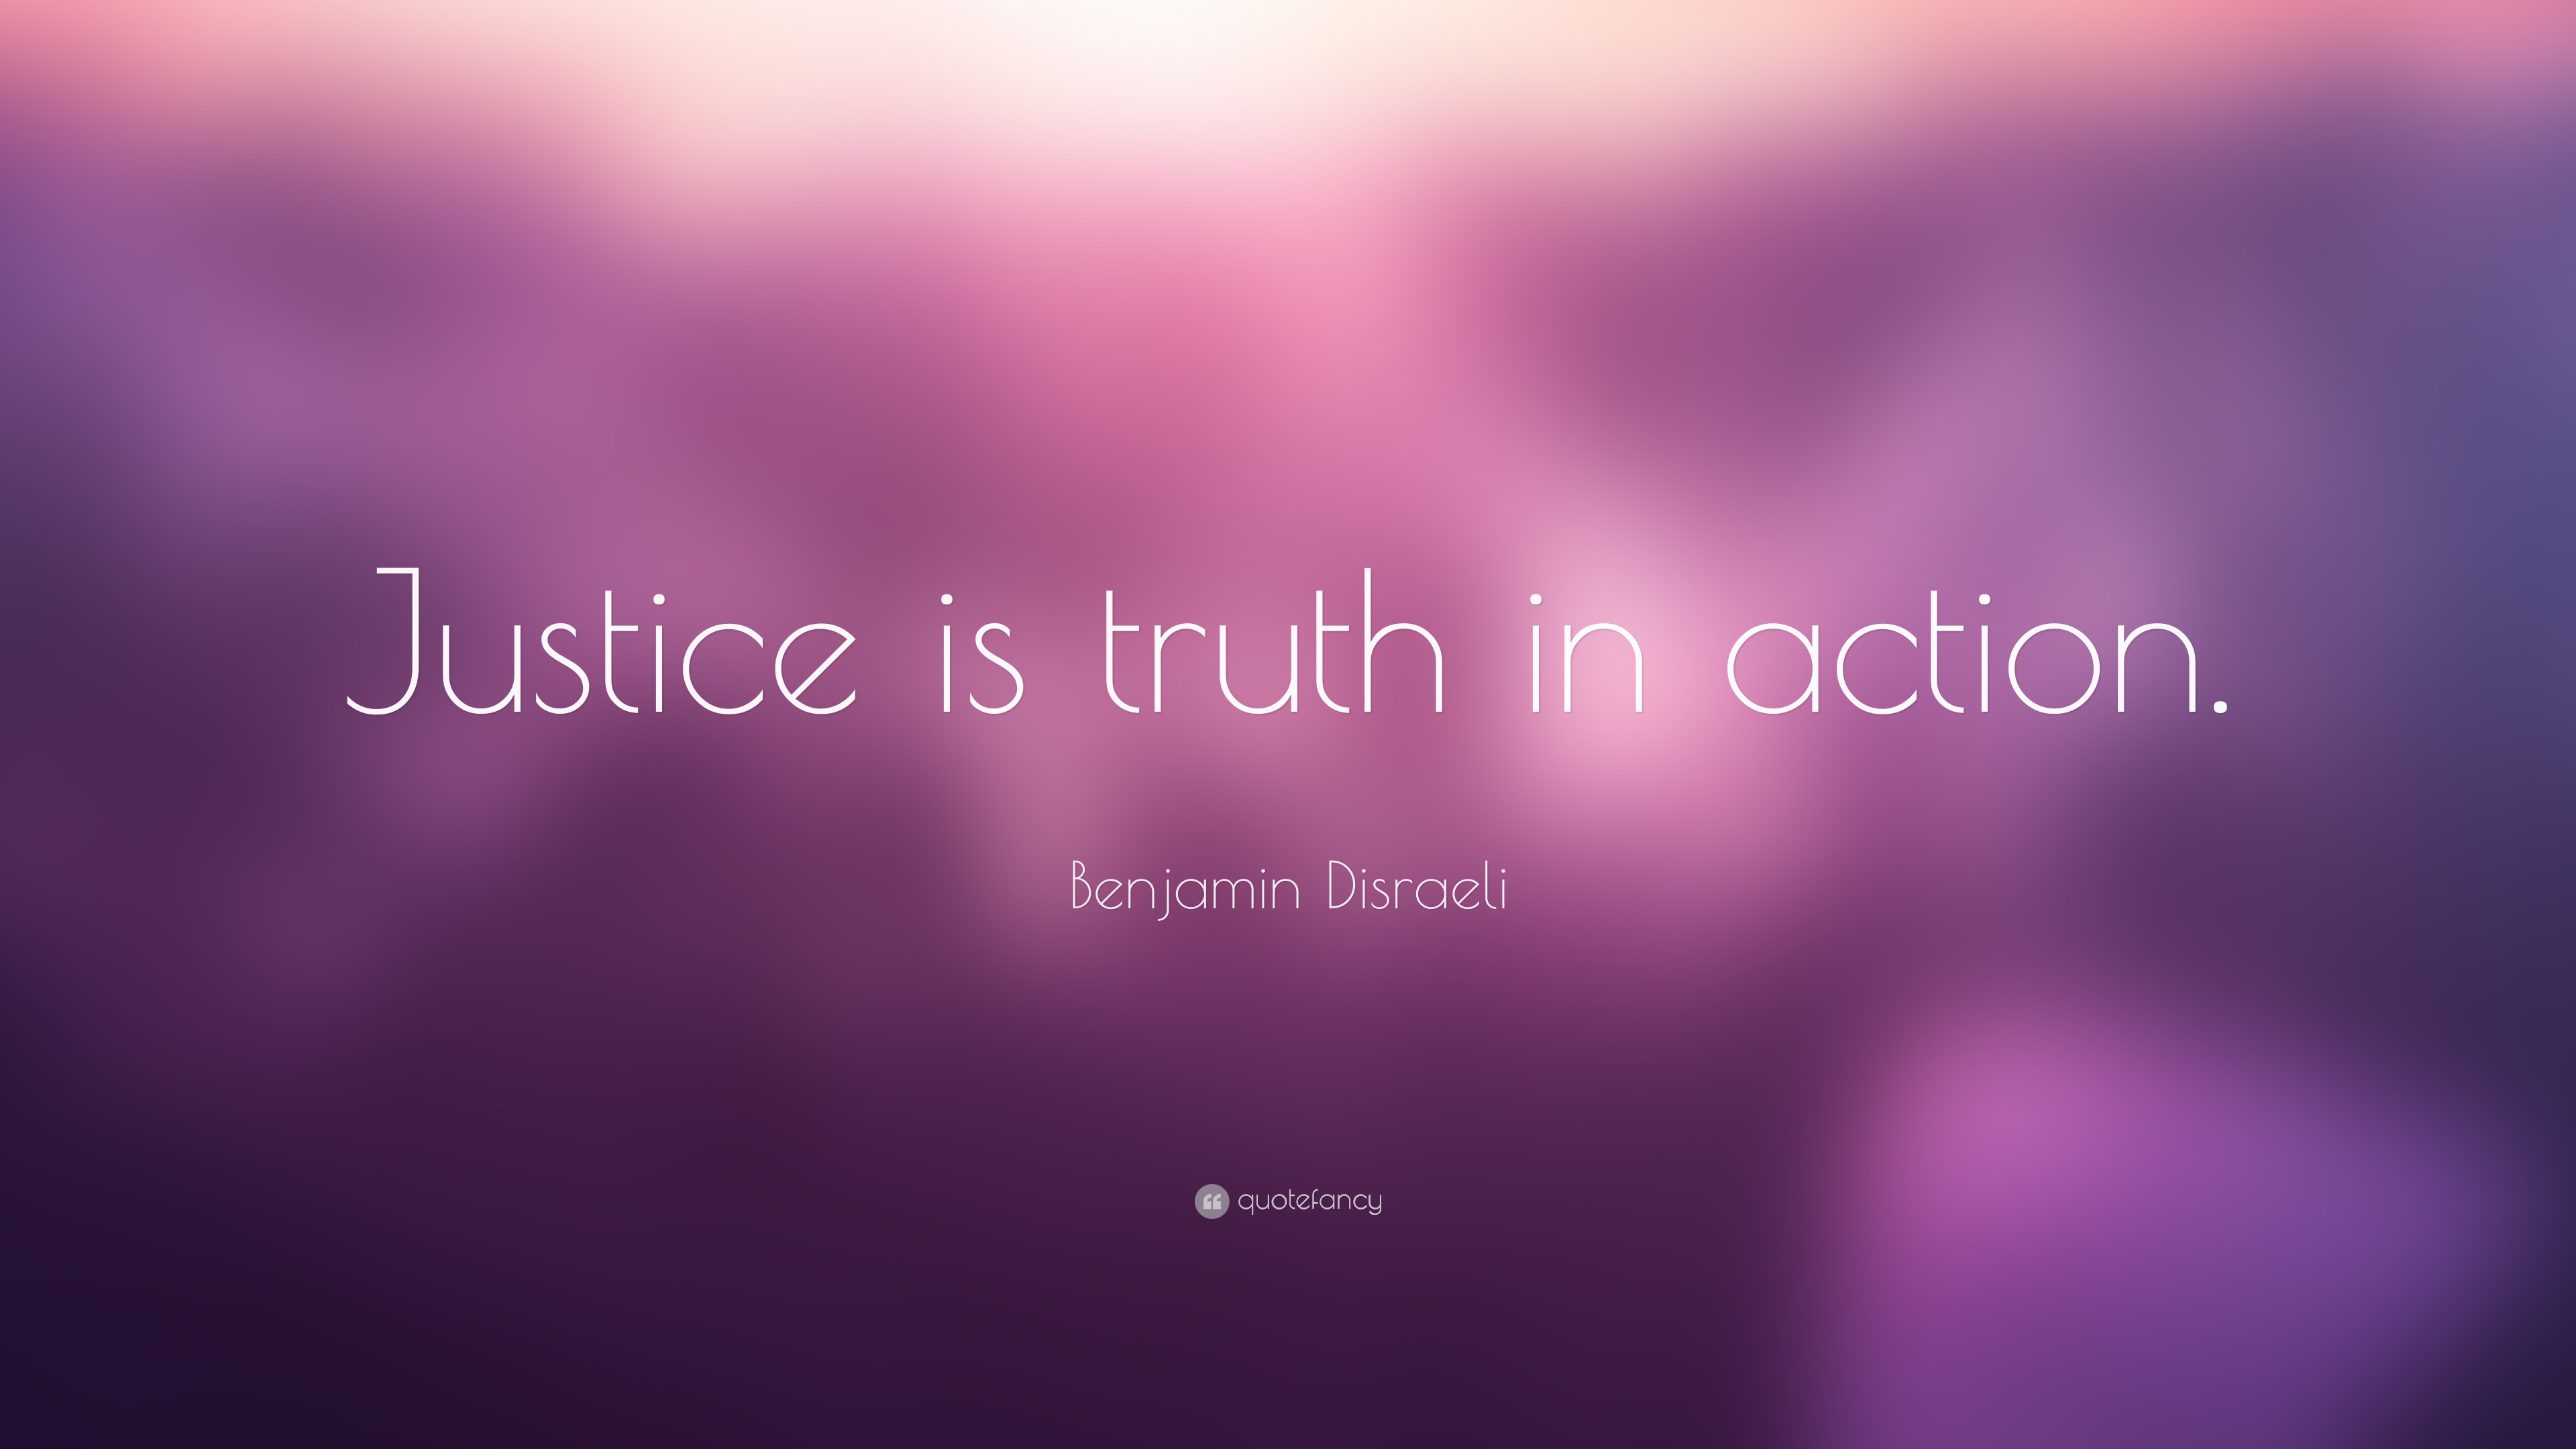 Benjamin Disraeli Quote: “Justice is truth in action.” (5 ...